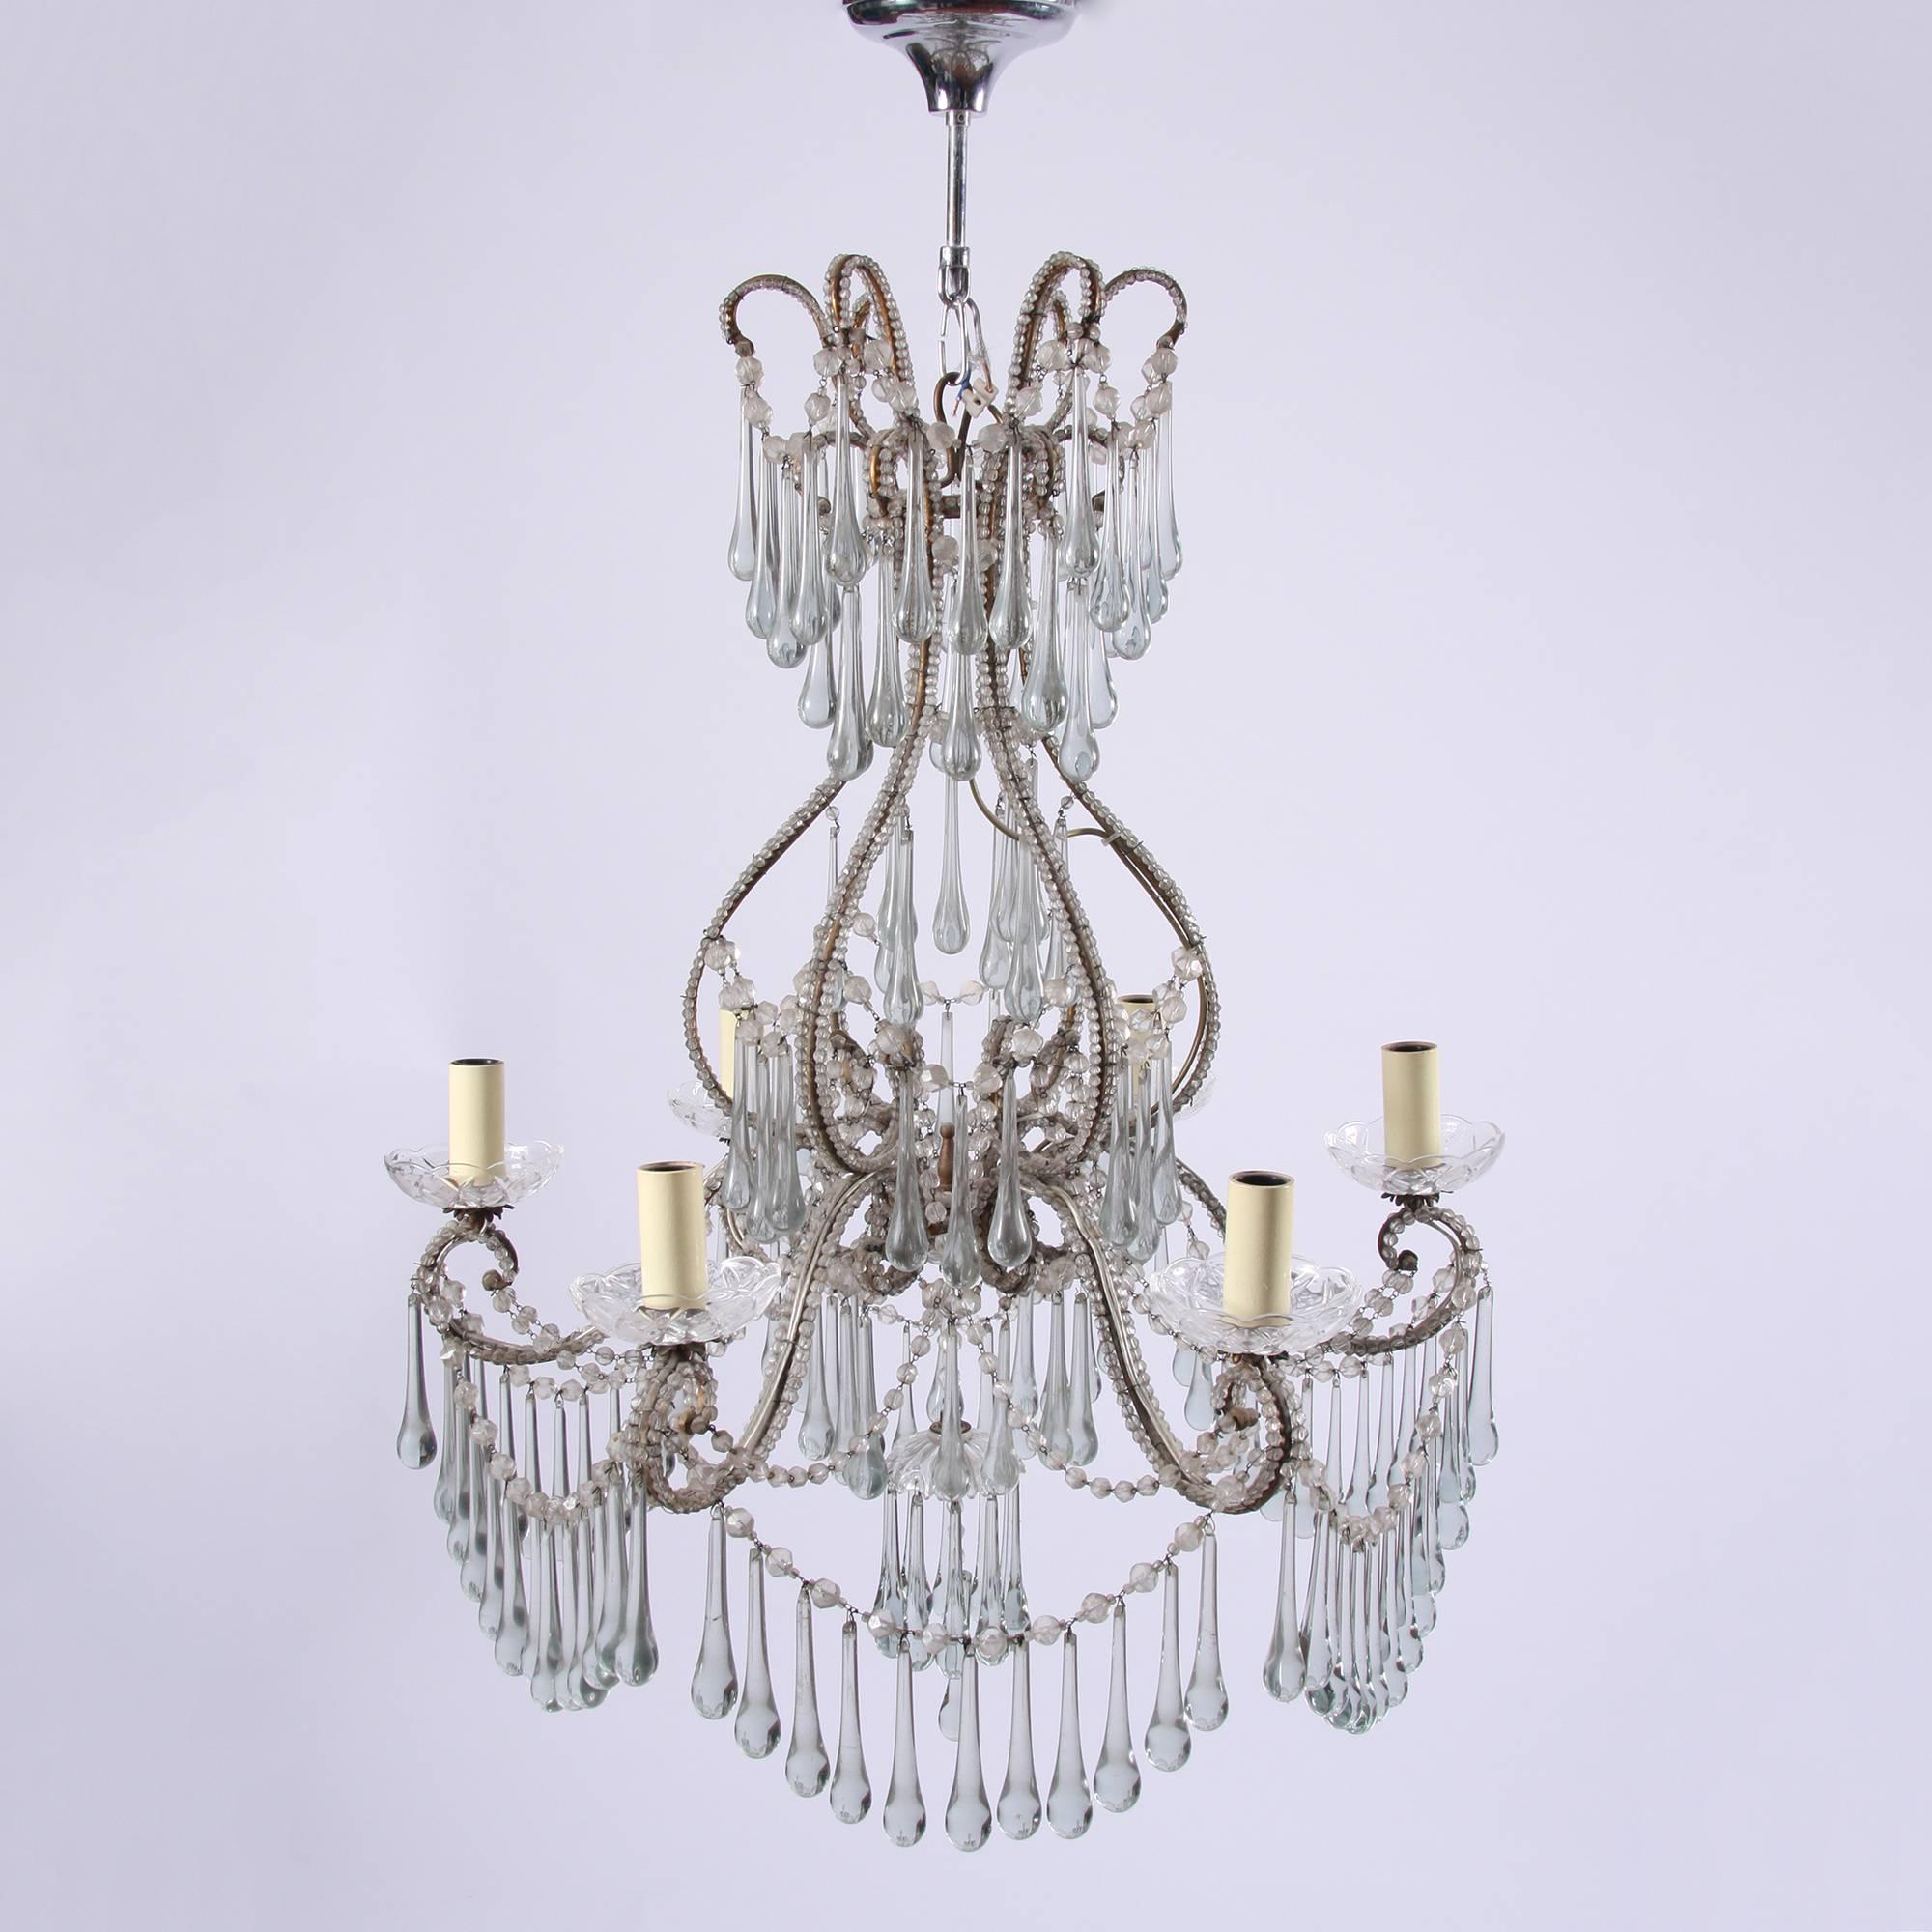 Italian, early 20th century

Italian beaded chandelier with light blue tear drops. Six arms. Rewired and PAT tested.